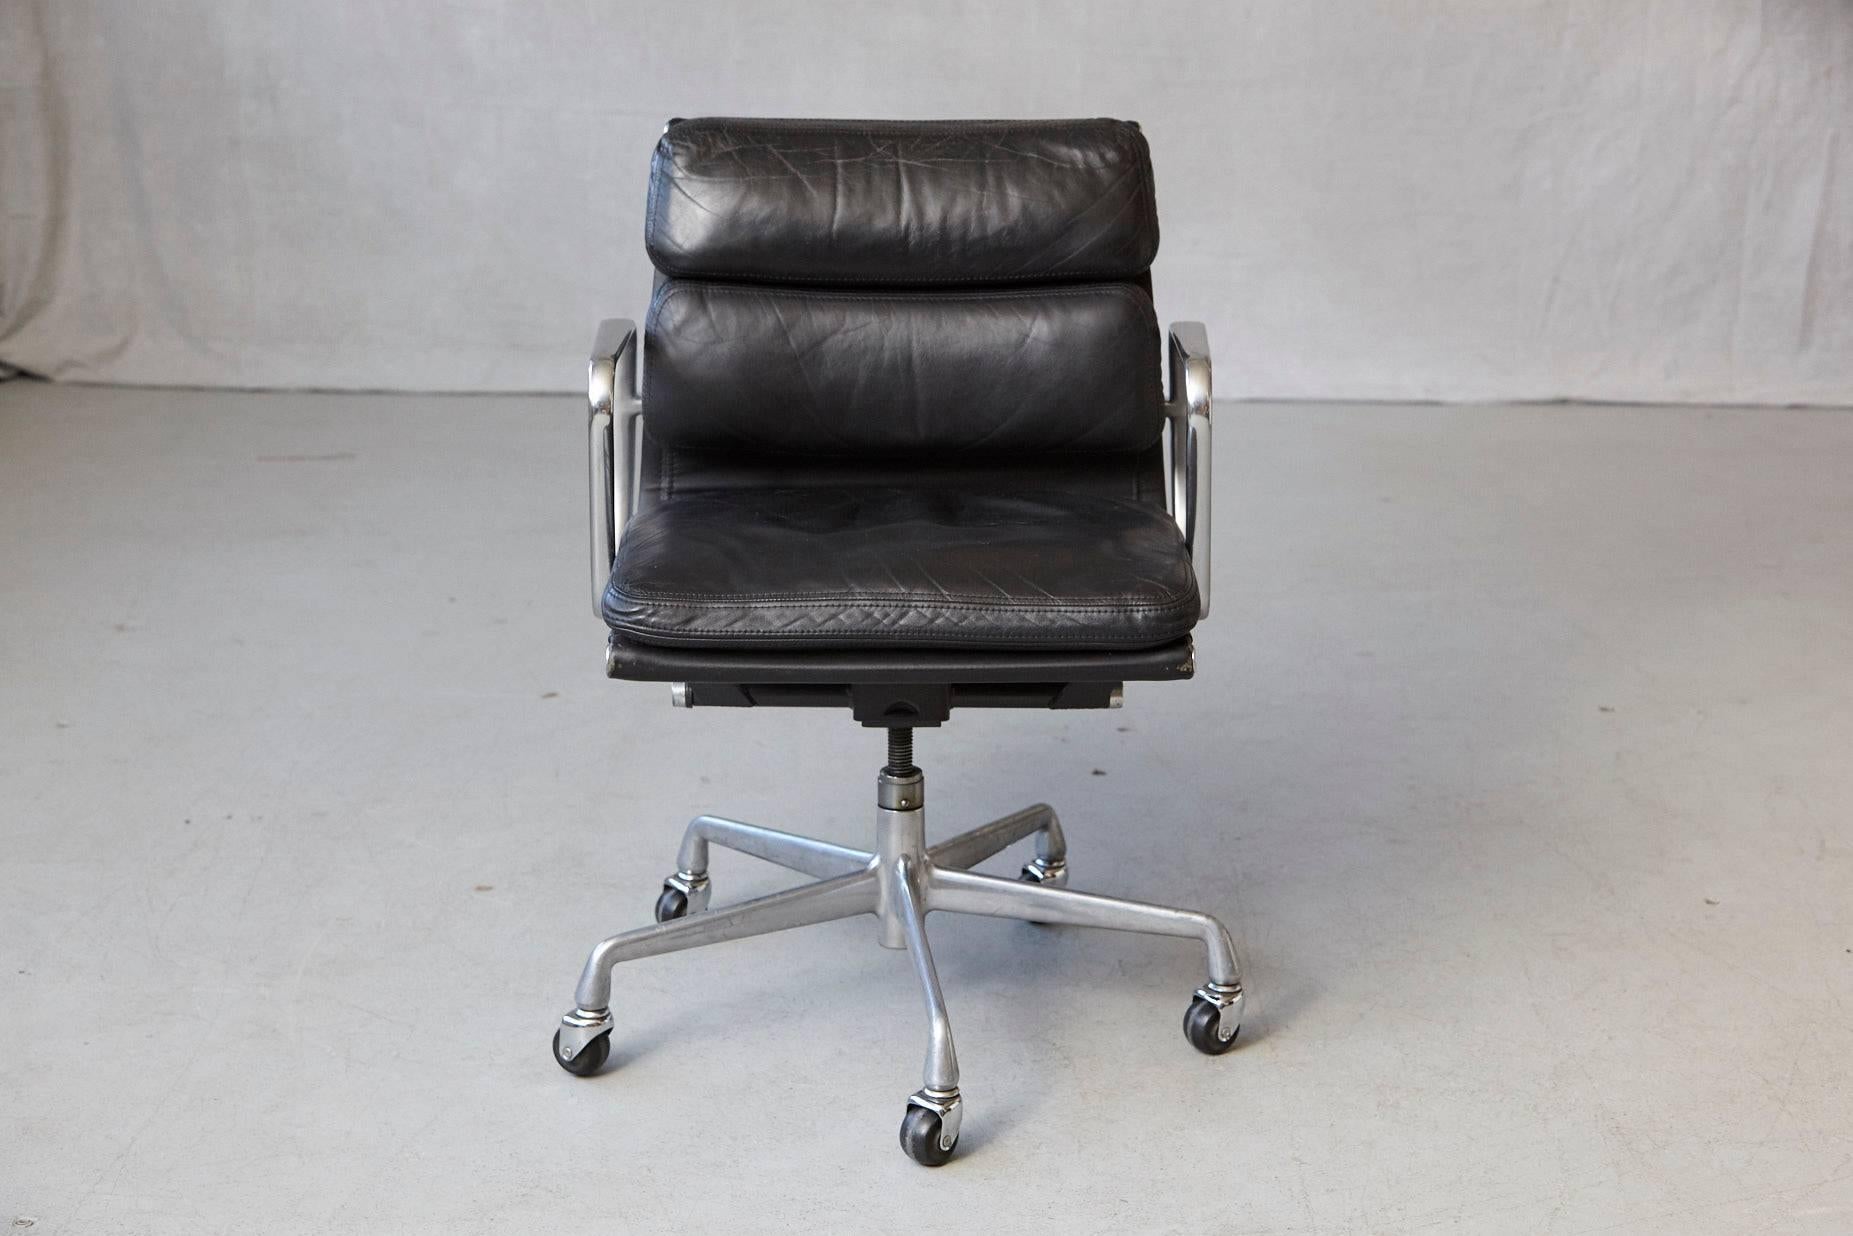 Eames Aluminum Group black leather soft pad Executive chair (model EA 435) on casters for Herman Miller.
The seat has the original soft black leather upholstery and is raised on a spindle seat-height adjustable lightweight aluminium frame with a